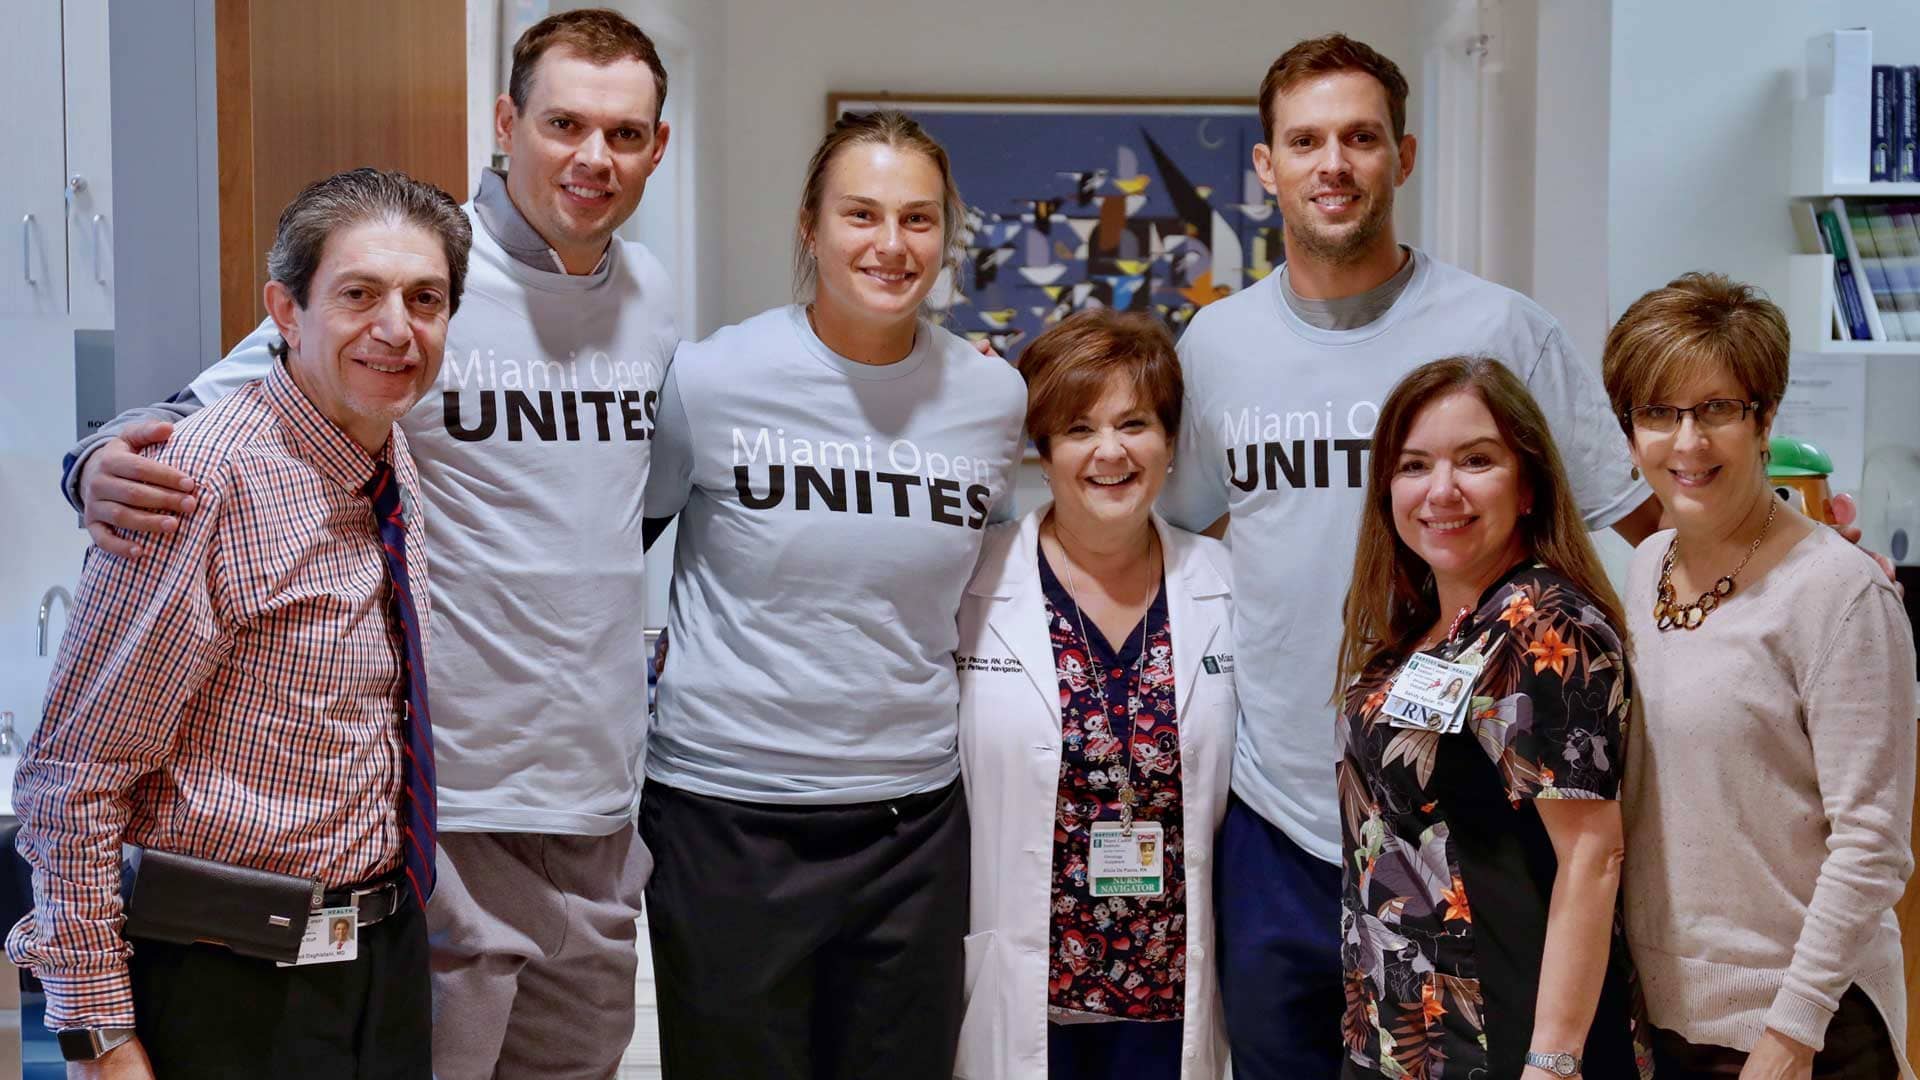 The Bryan Brothers and Aryna Sabalenka lent their time during Miami Unites Day.